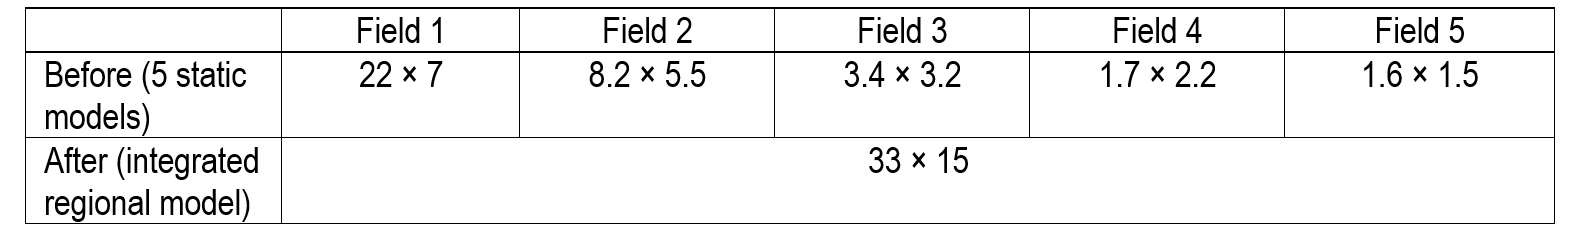 Table showing 3D grid dimensions in kilometers